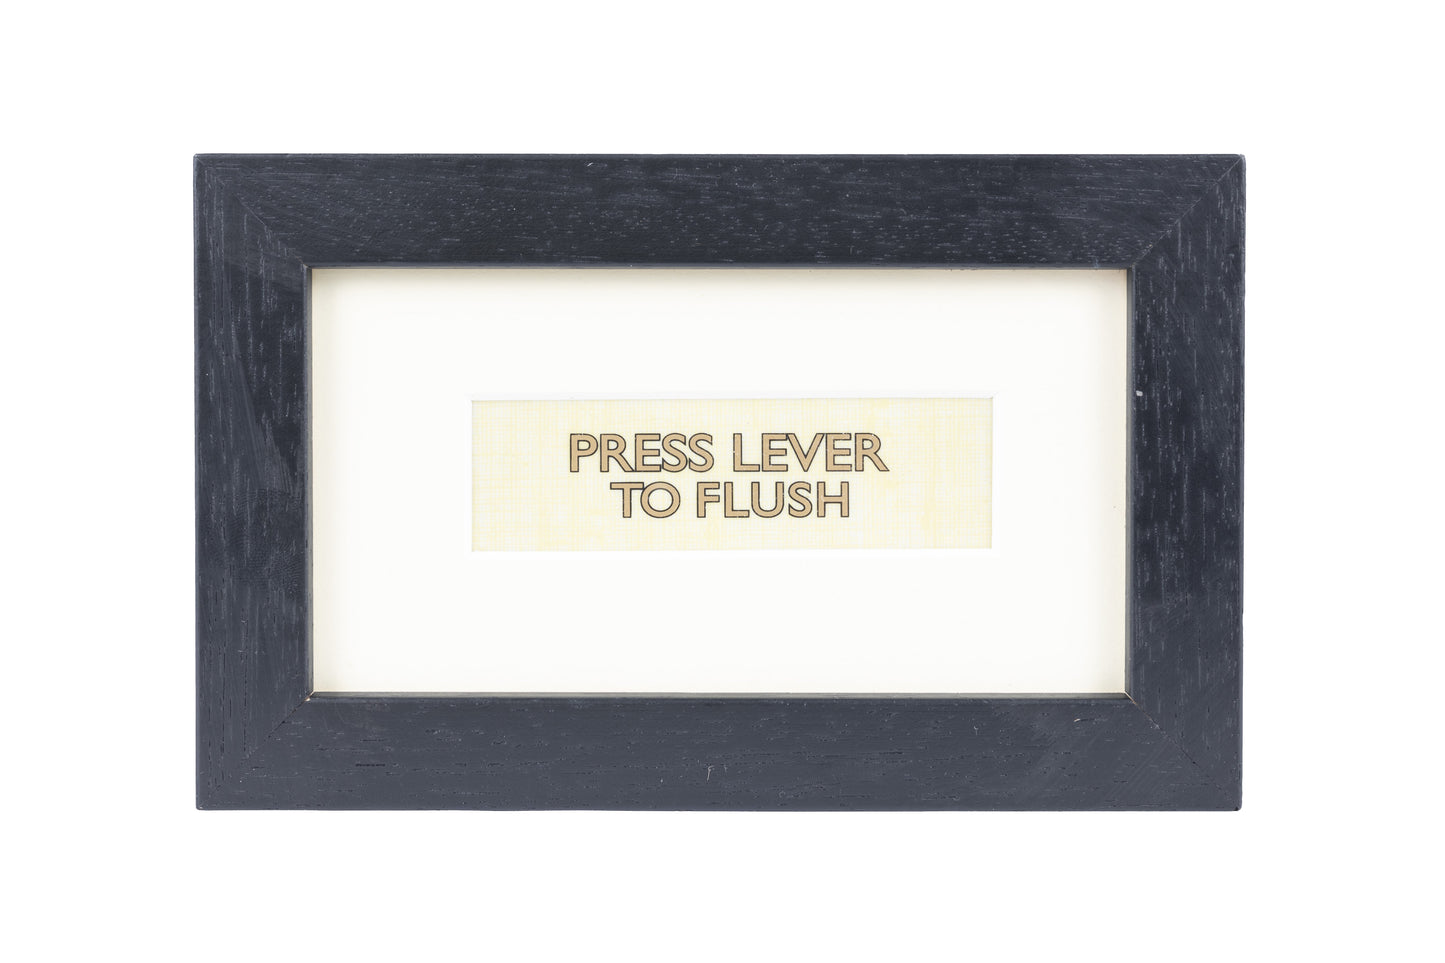 A black frame with a white background and a Press lever to flush gold text on a white plain print background